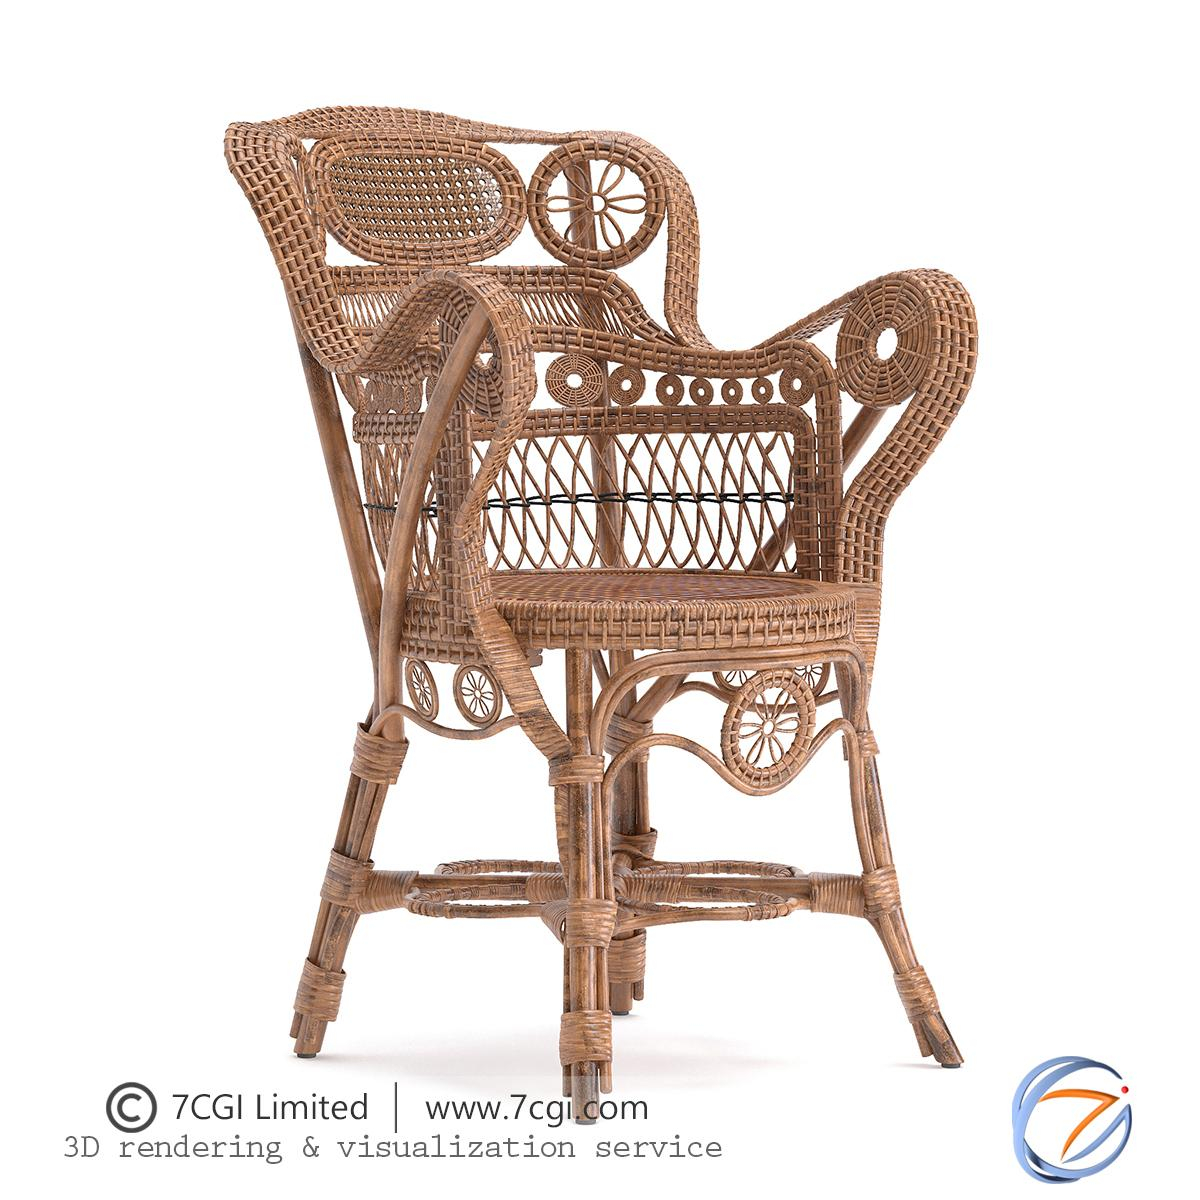 3D rendering of wicker furniture products